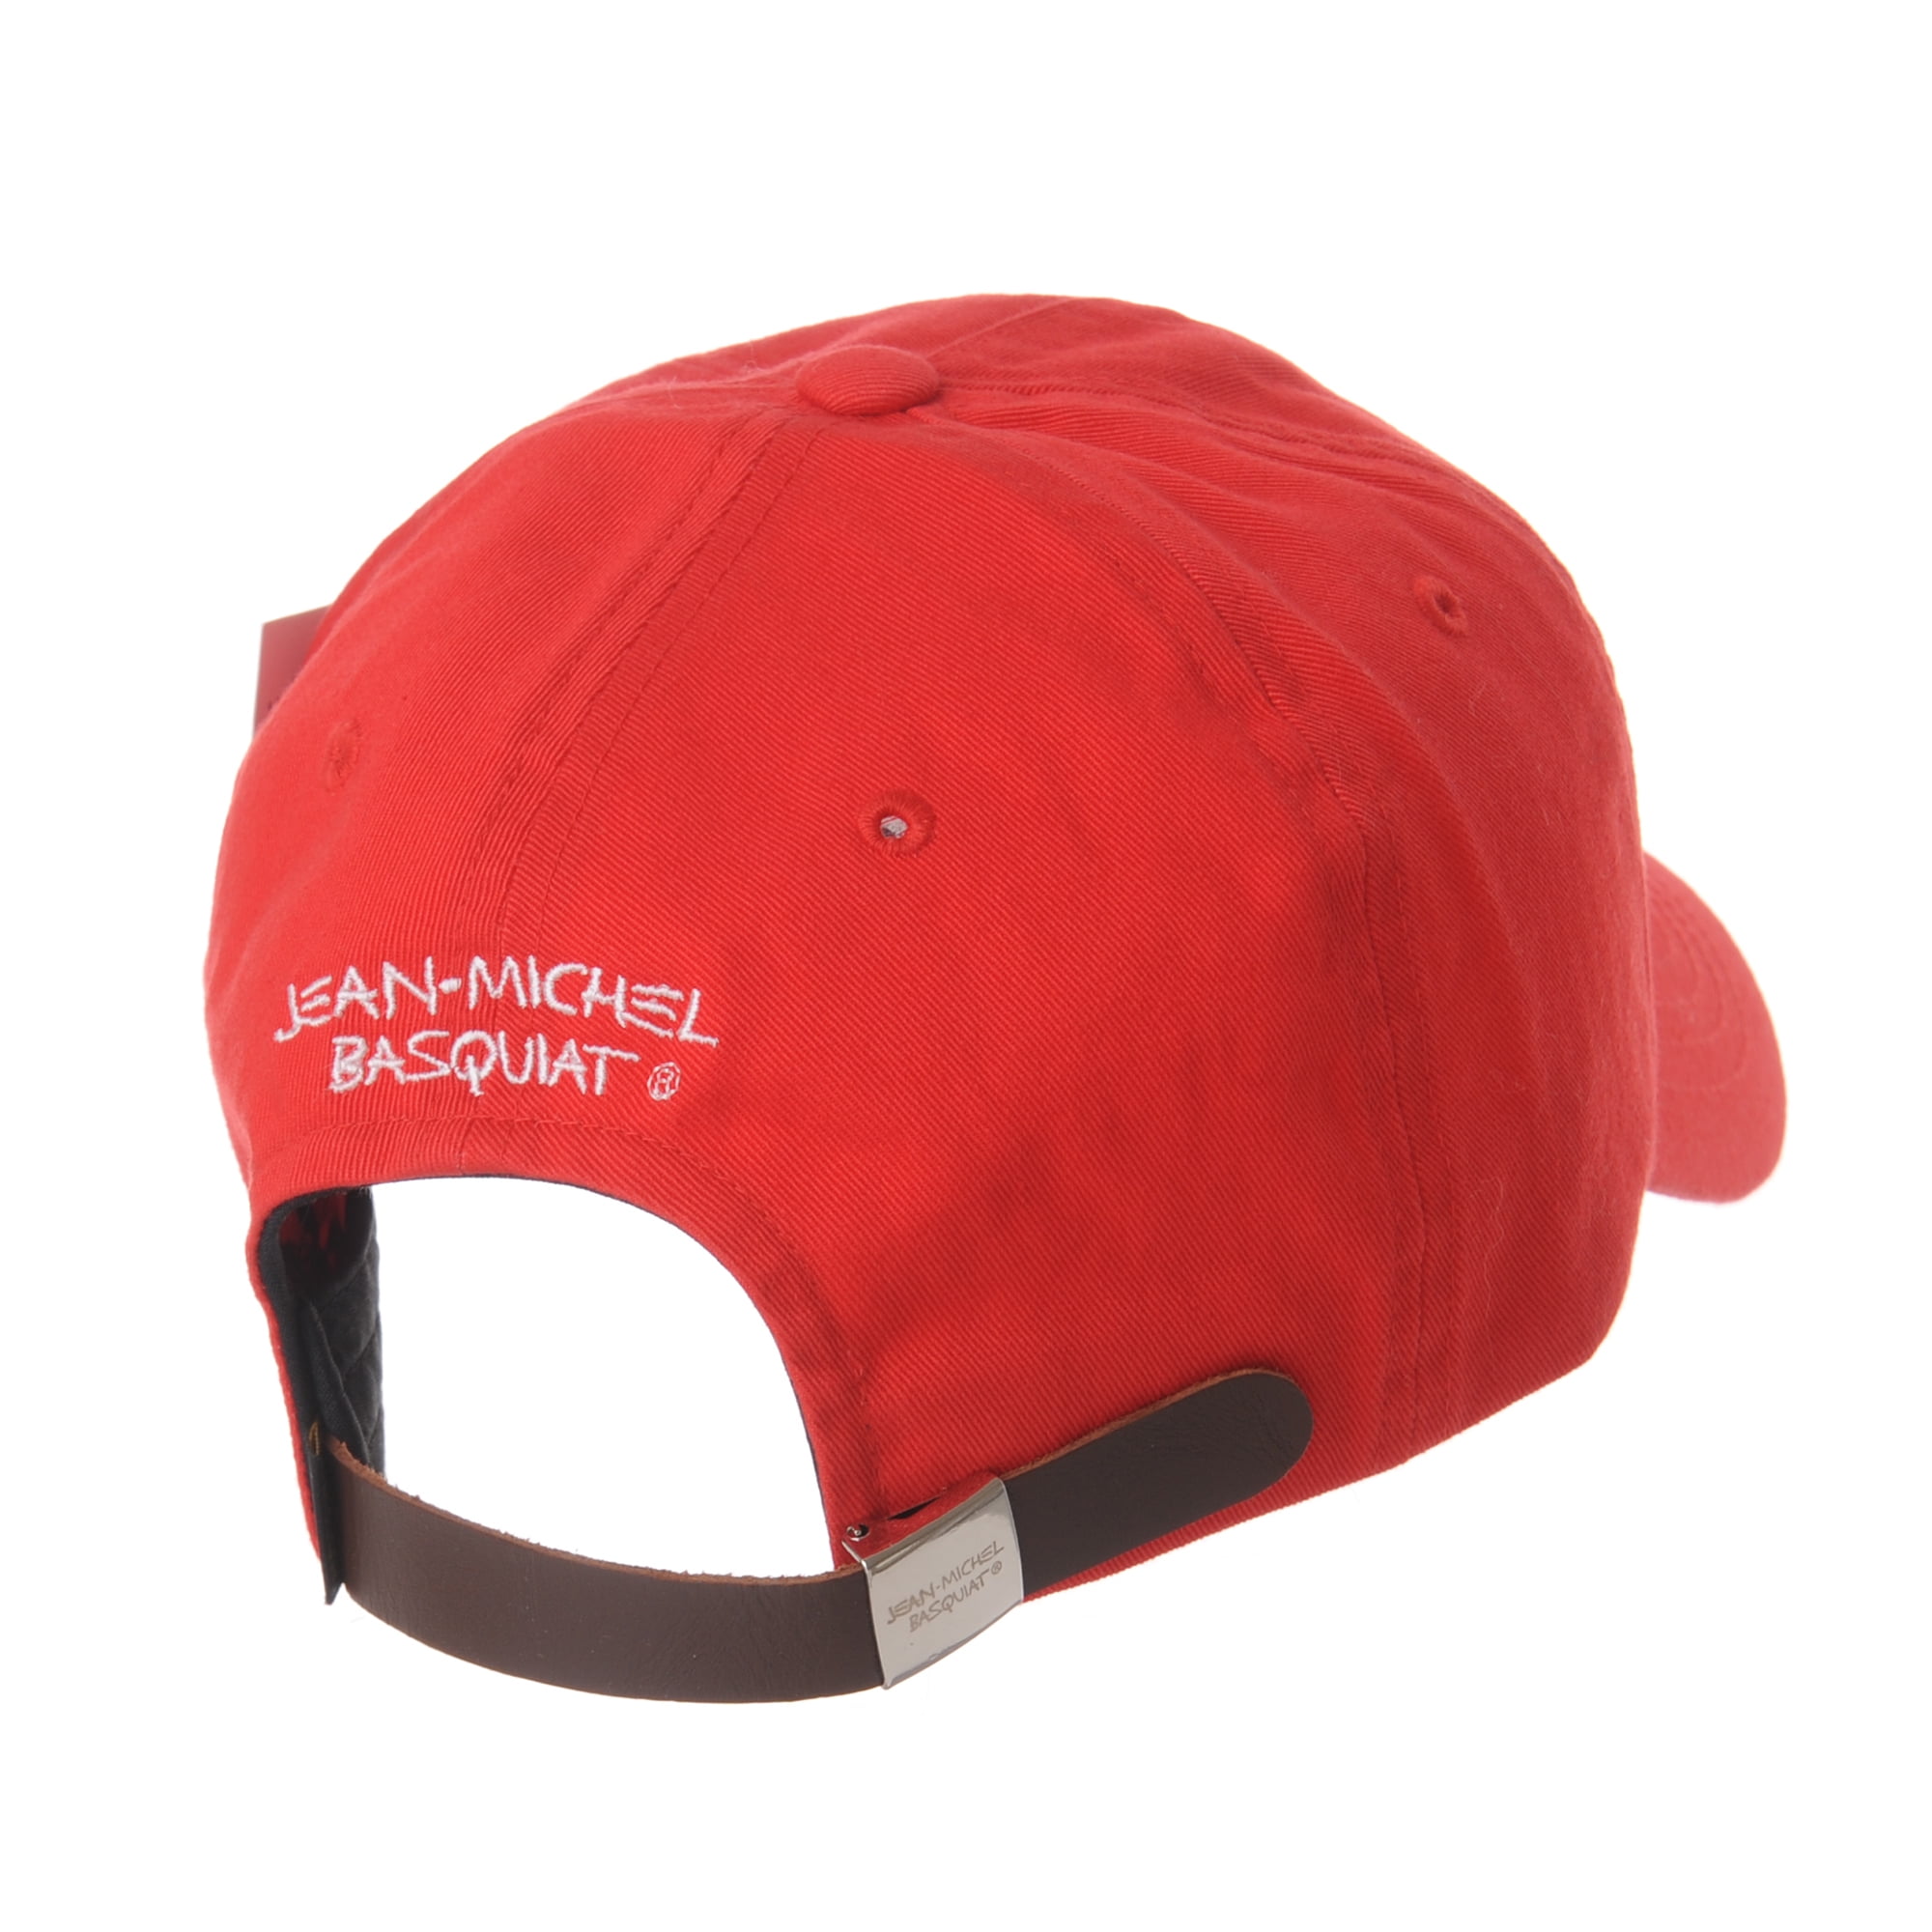 CR1616 Basquiat Baseball Jean-Michel Cap (Red) Crown Embroidery WITHMOONS